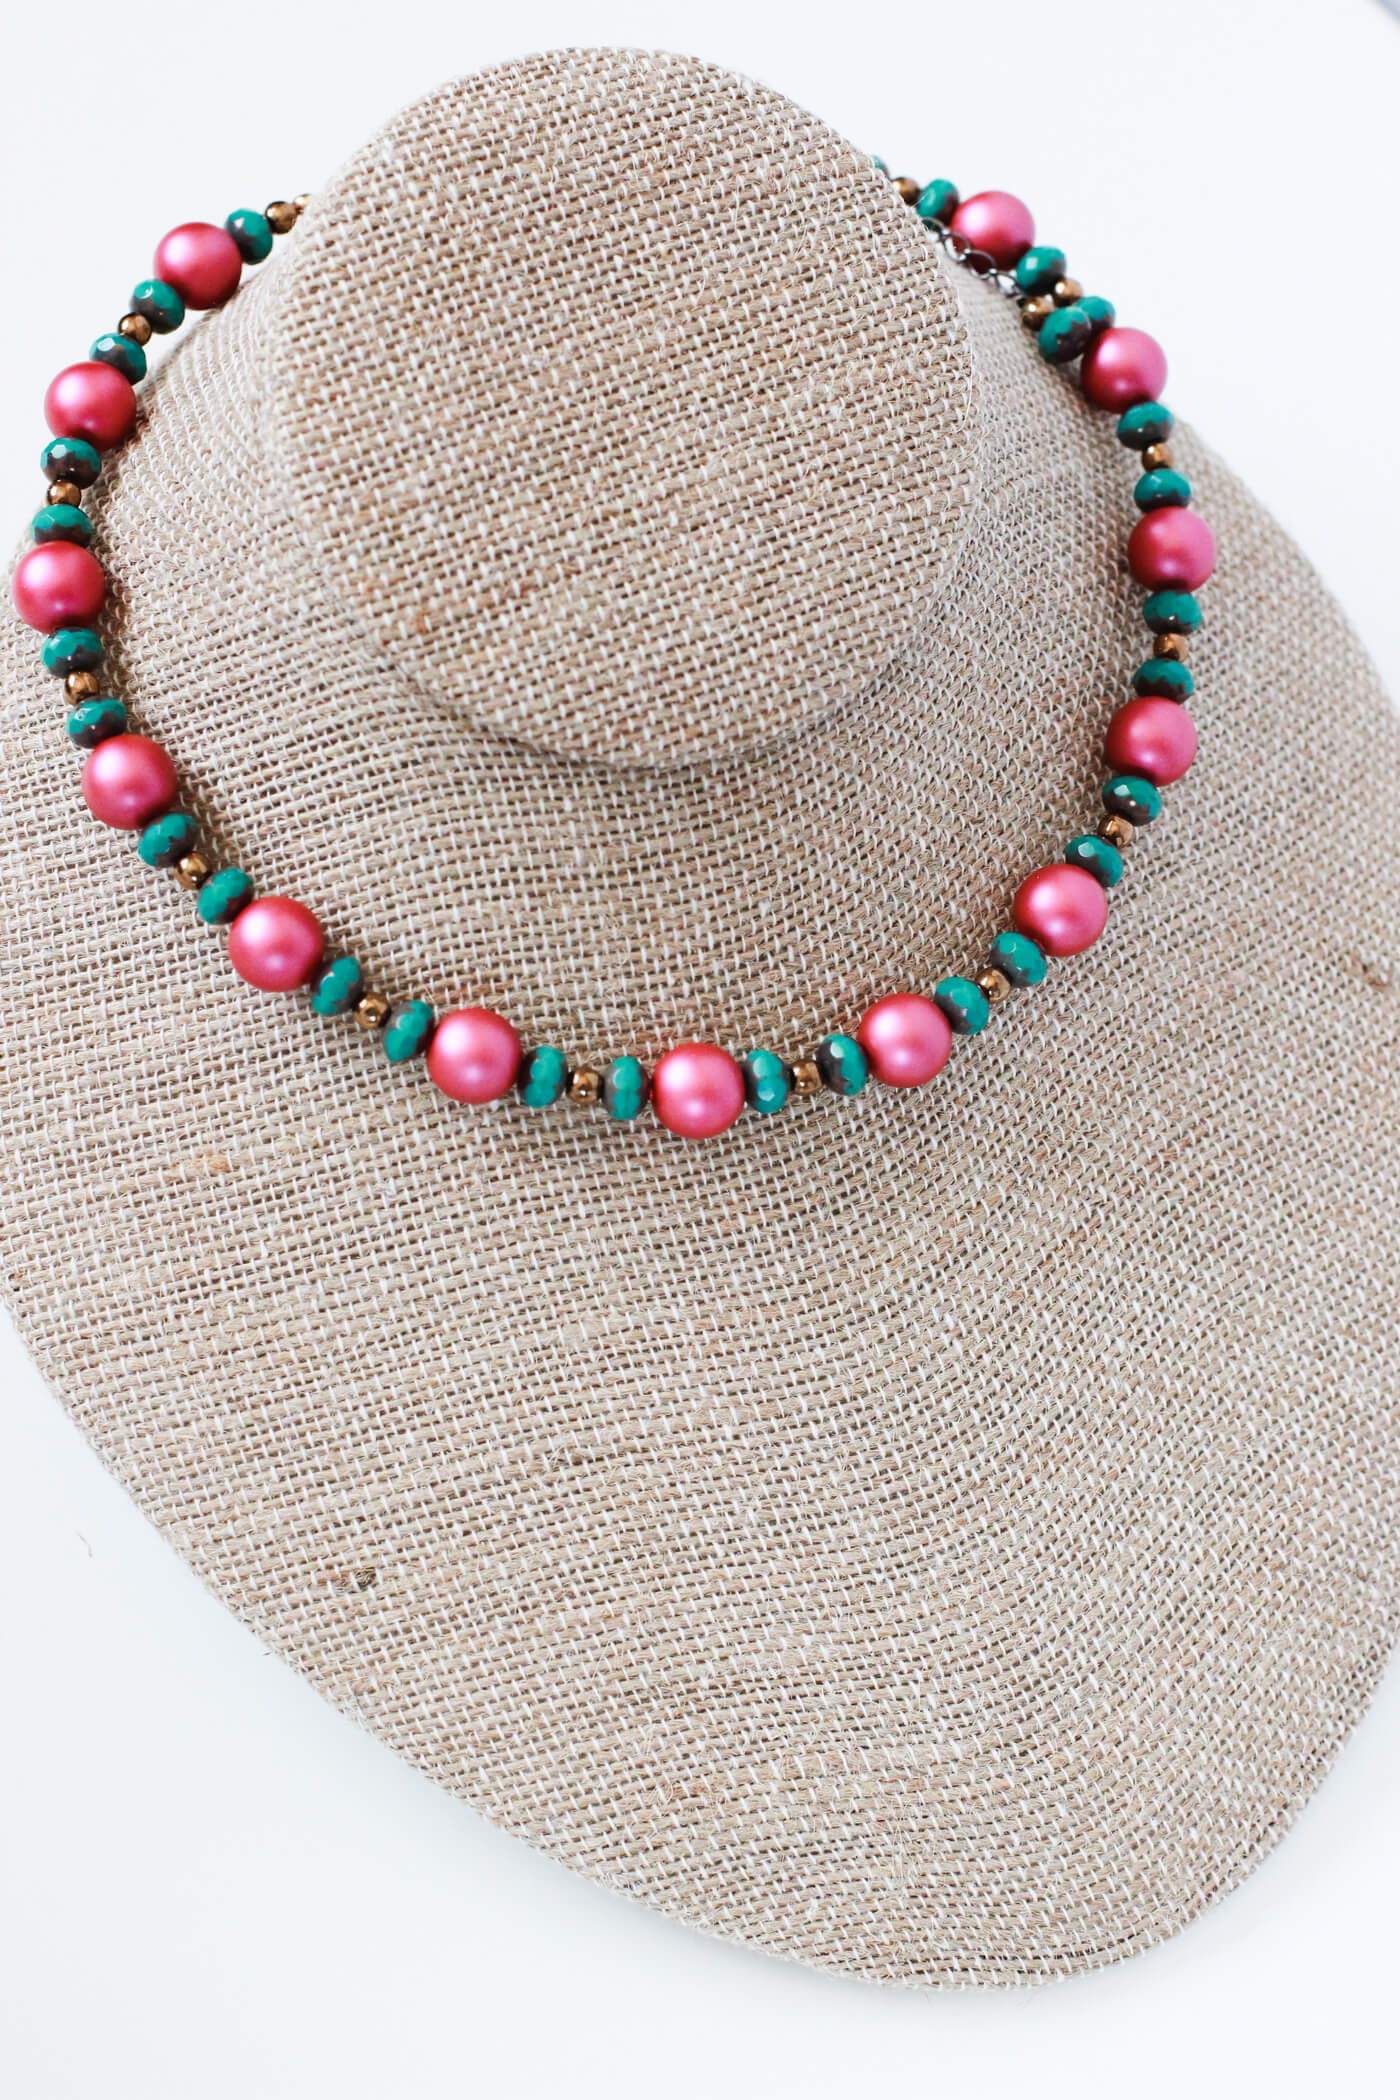 Hot Pink Necklace - Bold Jewelry by Kaleidoscopes And Polka Dots